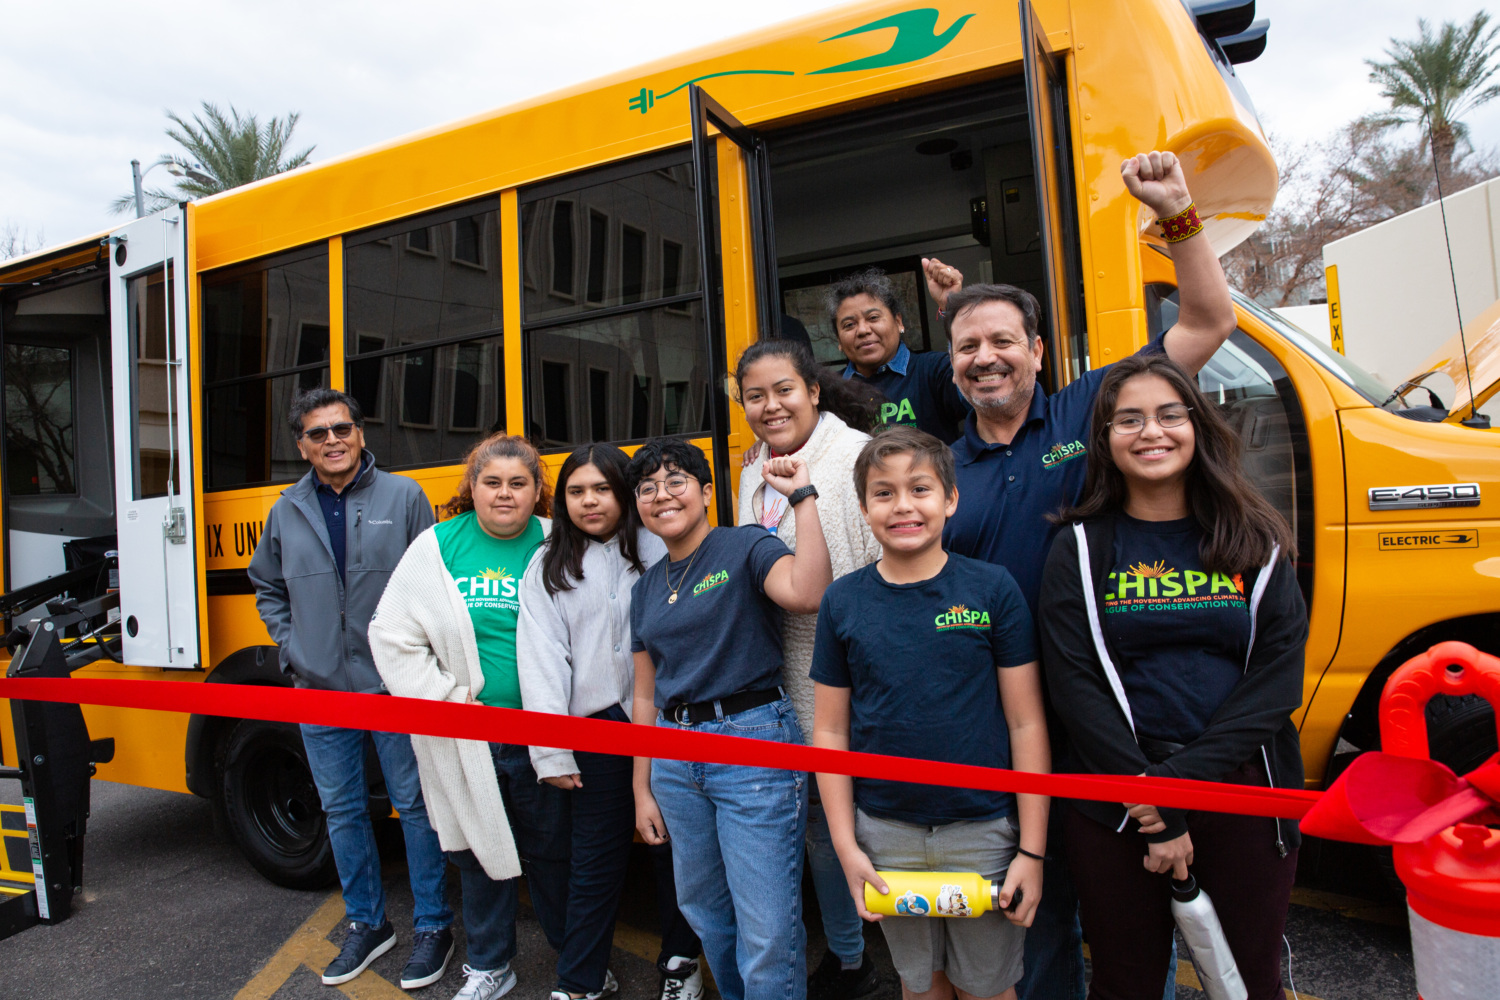 Chispa activists celebrating in front of an electric school bus.